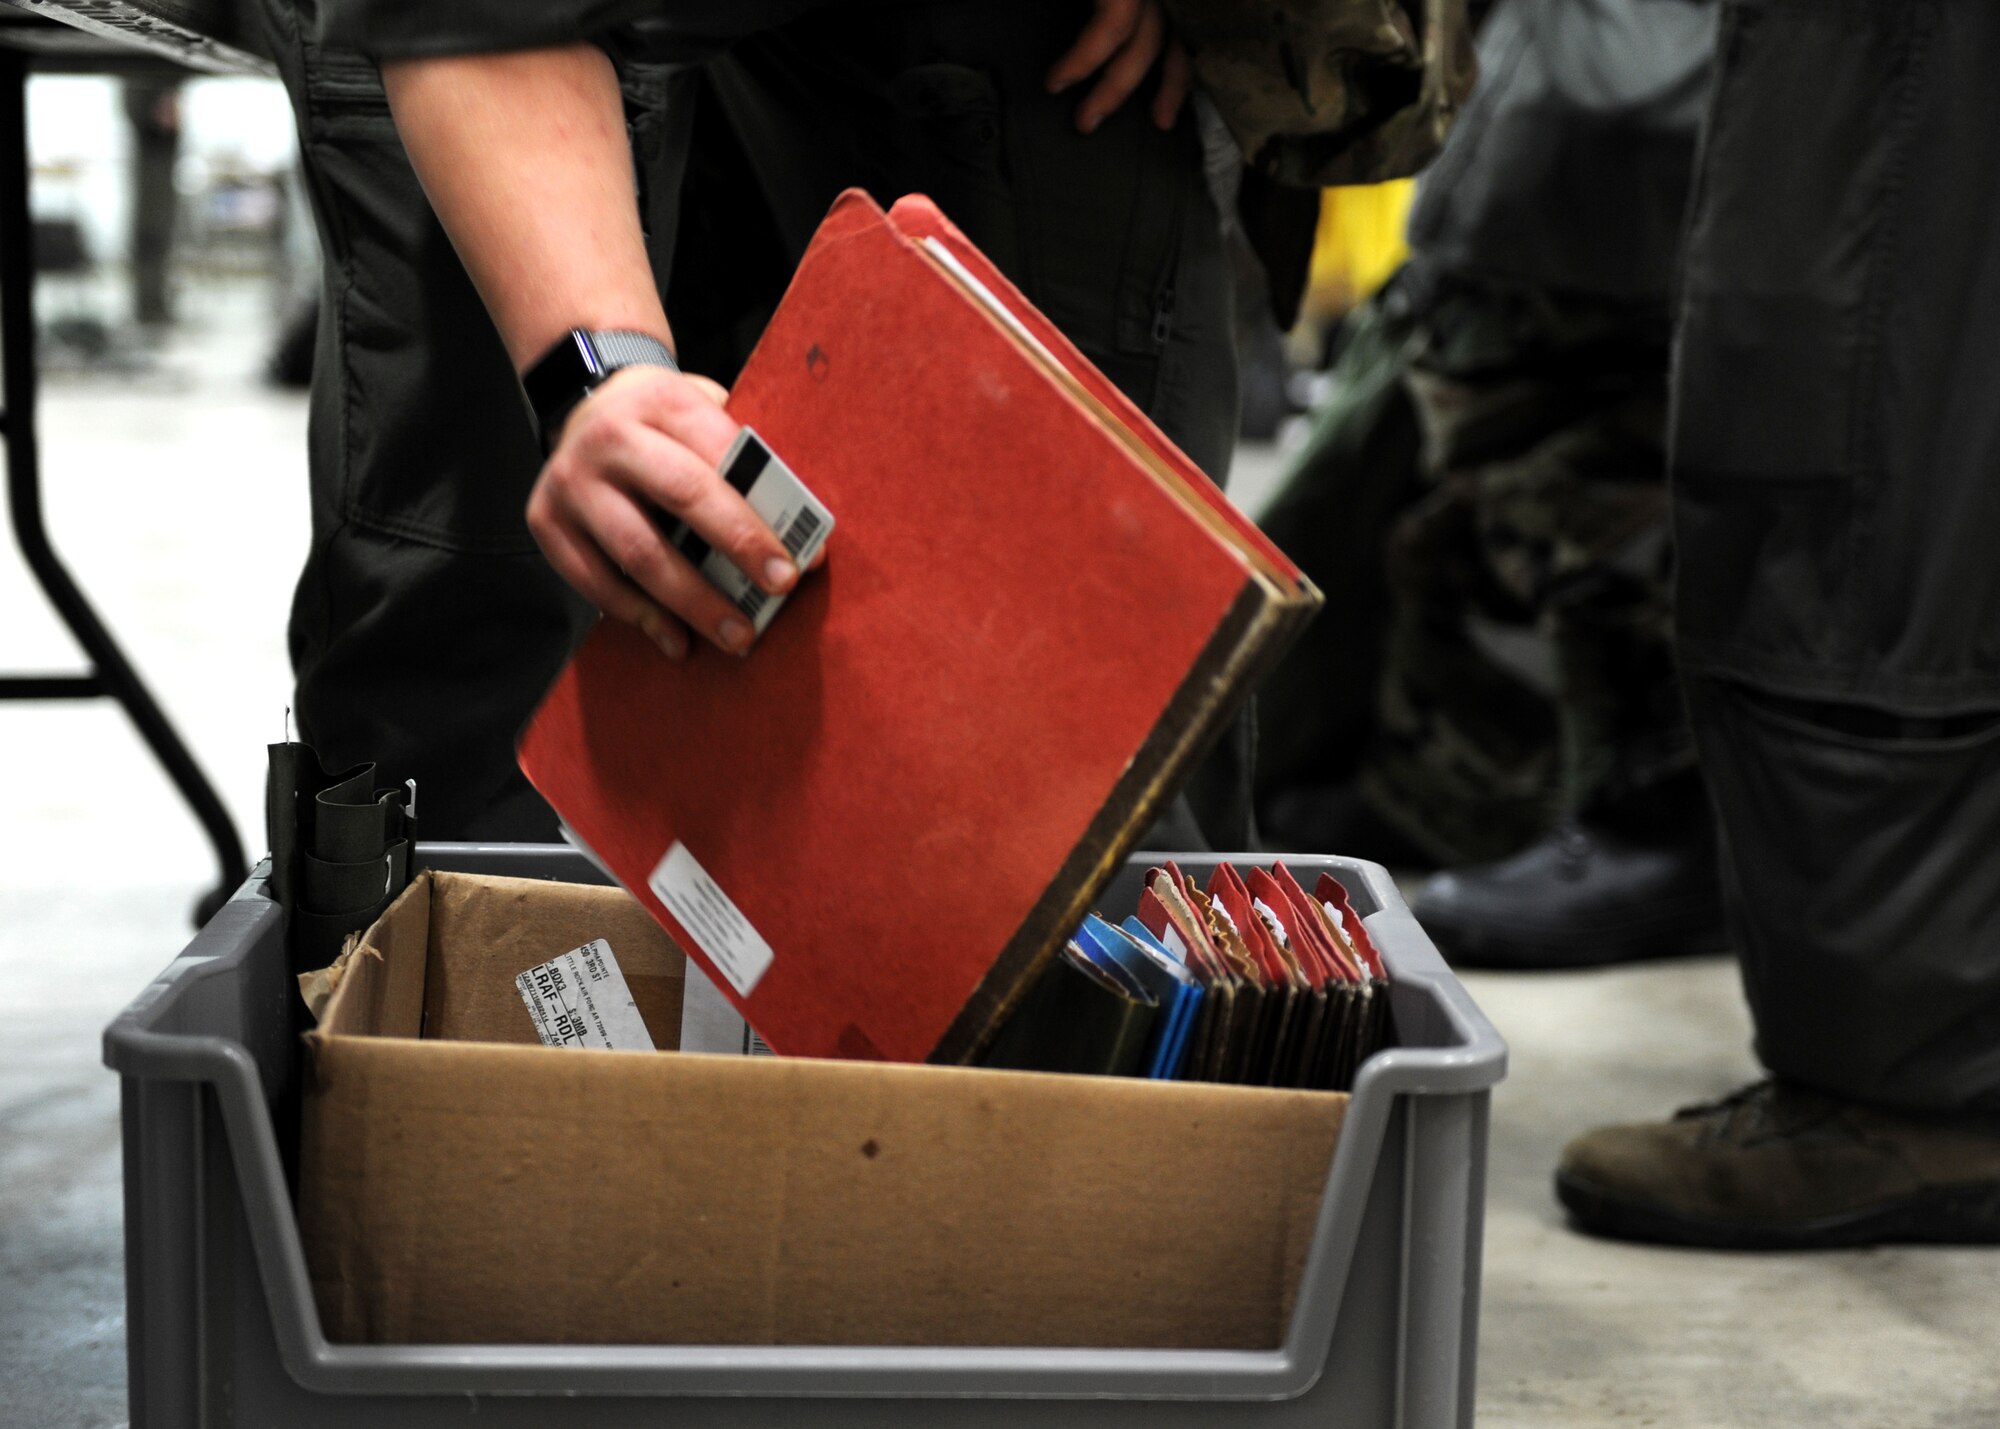 A photo with a red folding being placed into a grey container with other folders.